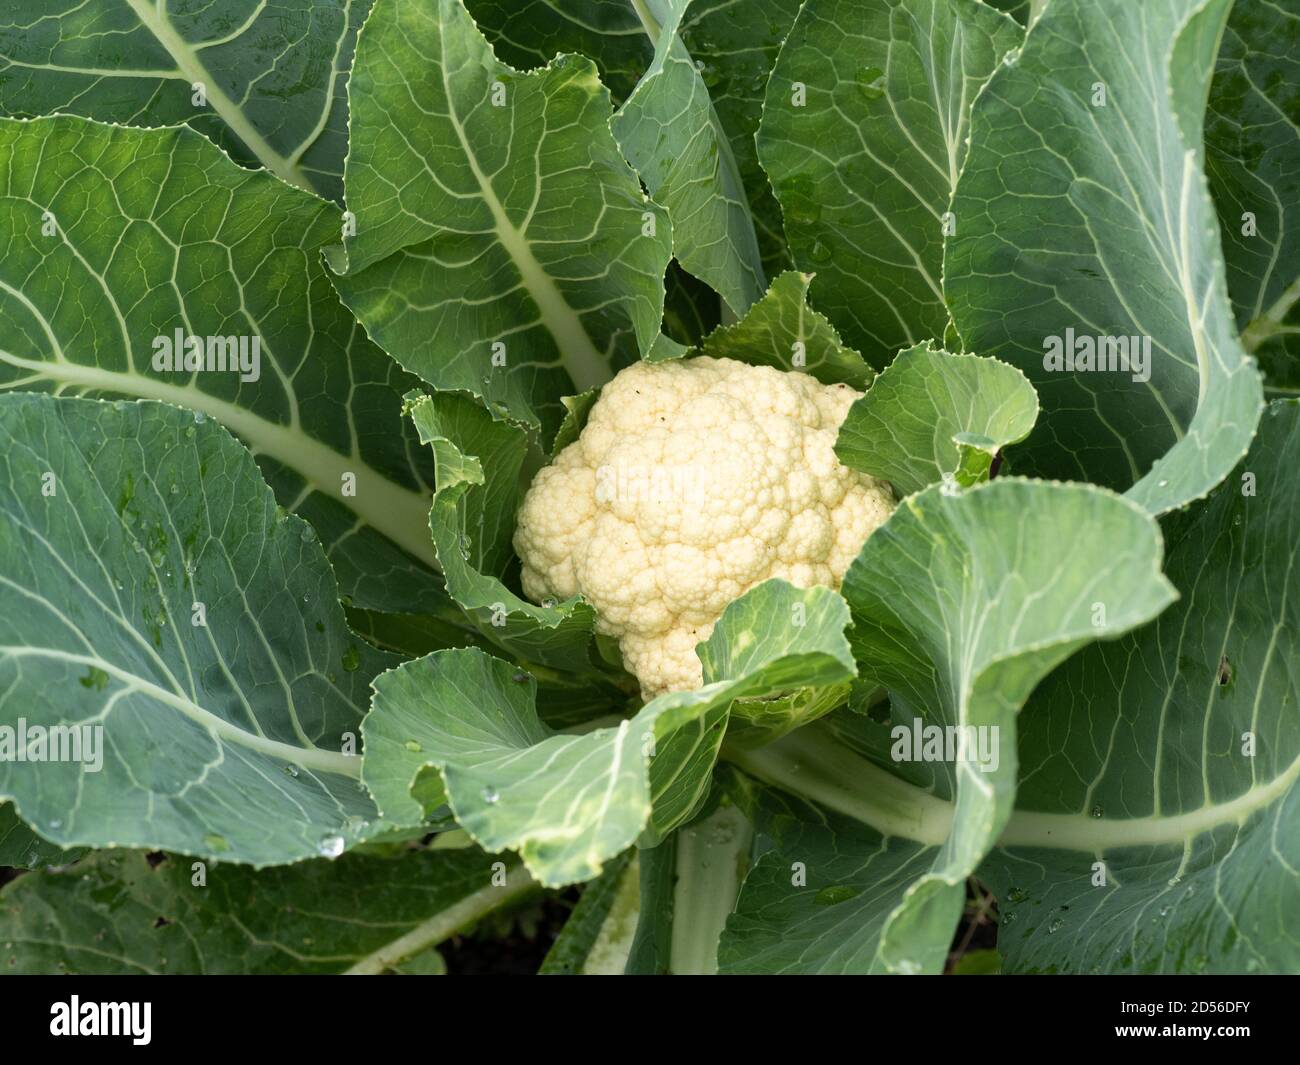 The F1 cauliflower Candid Charm showing a curd ready for cutting surrounded by fresh green leaves Stock Photo